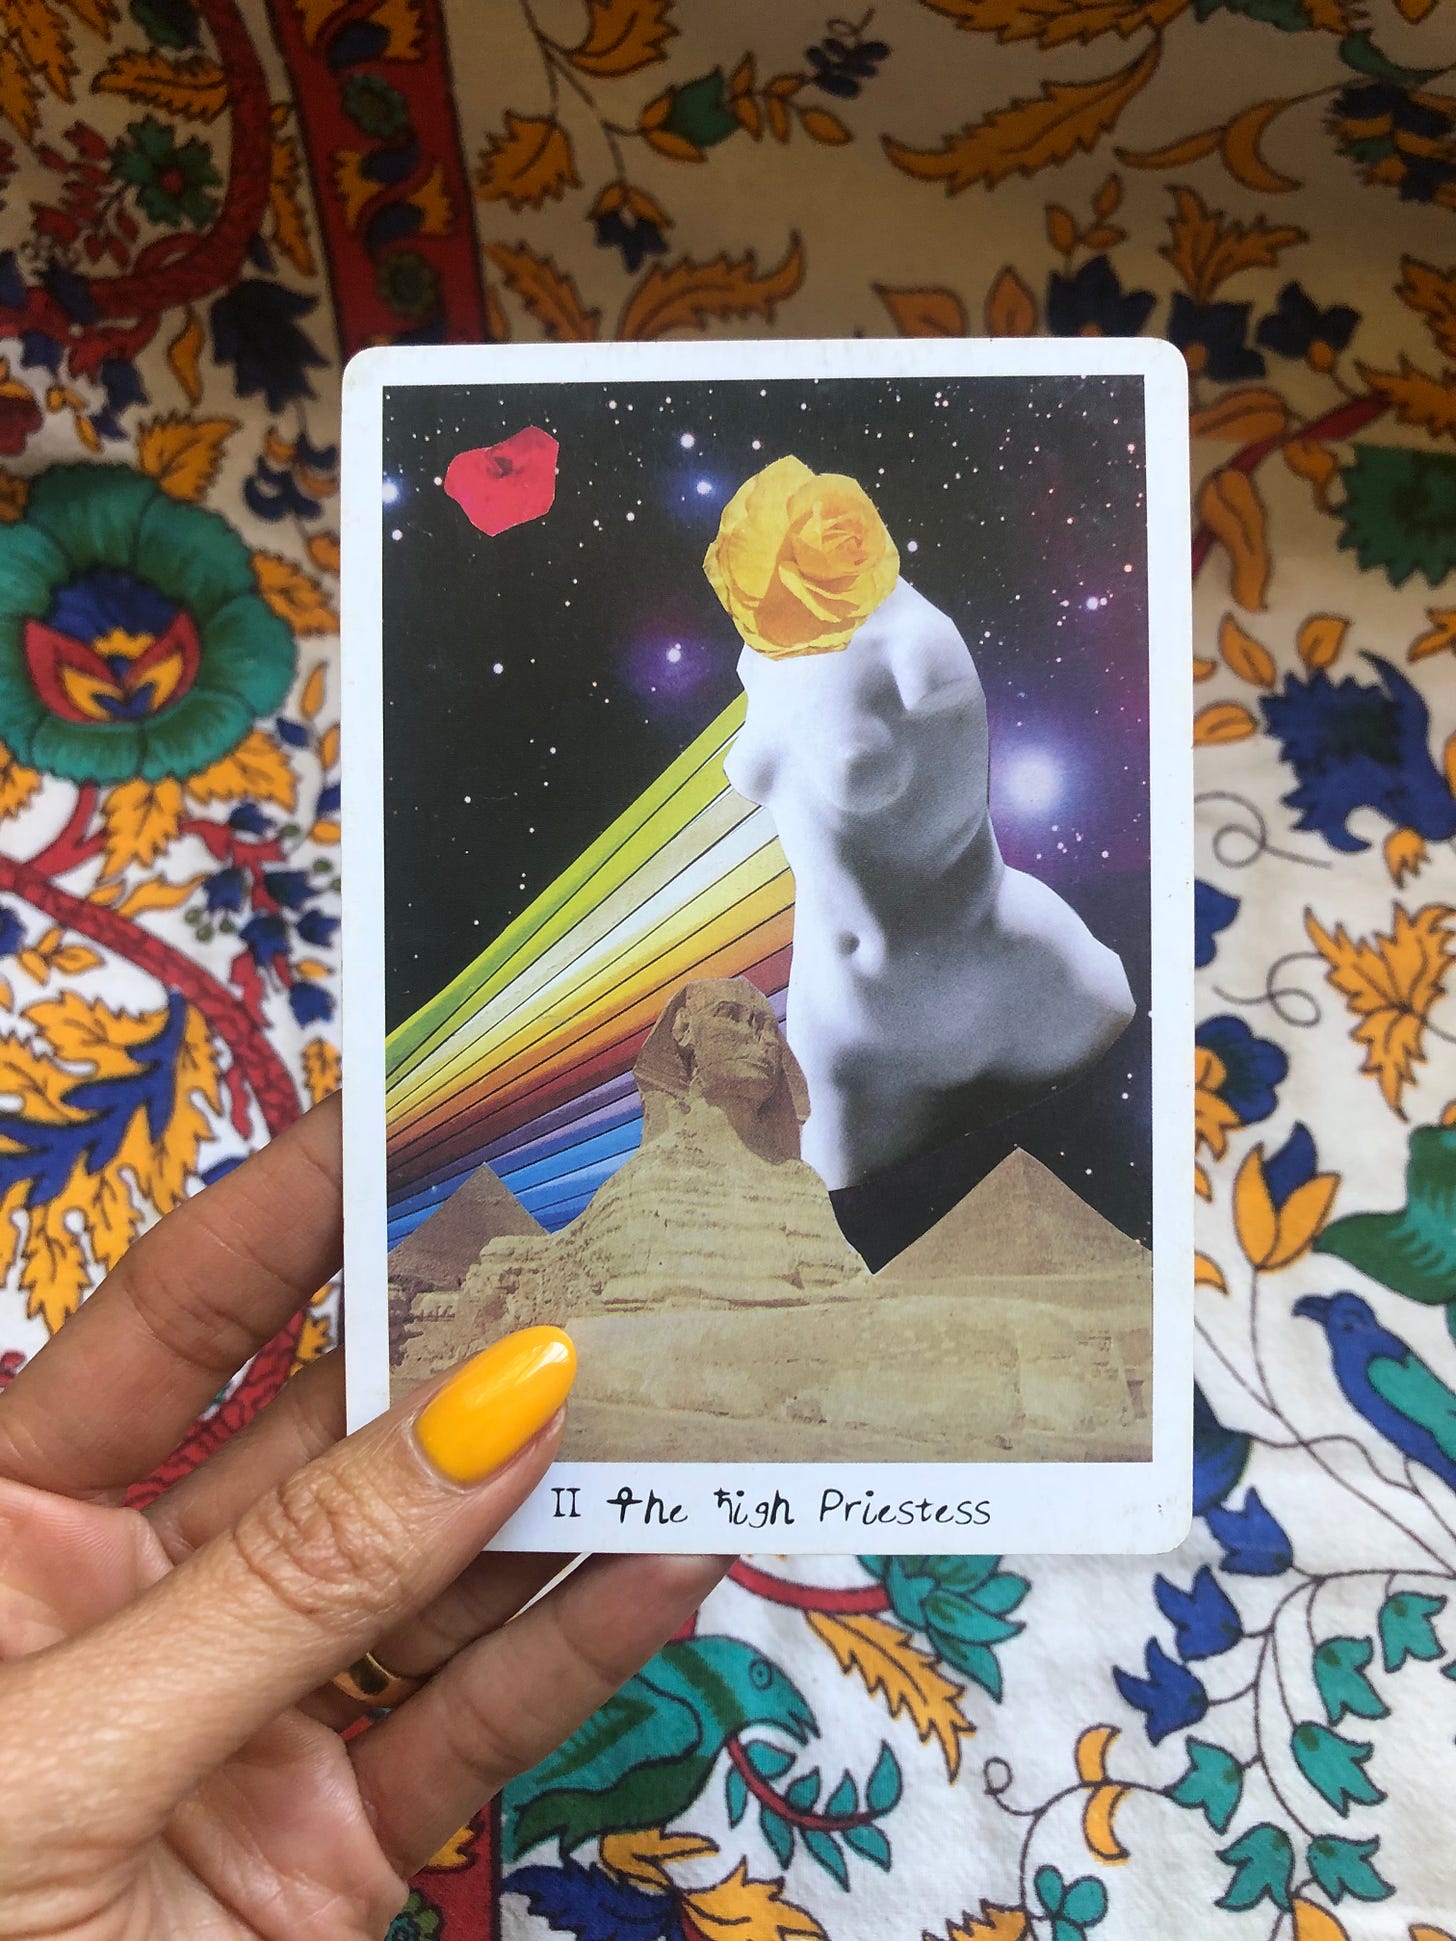 A hand with fingernails painted with yellow nail polish holds up The High Priestess tarot card from The Lioness Oracle Tarot deck. The card features a statue/bust of a female body, with a yellow rose for a head. There is a cut-out photo of the sphinx statue and pyramids in Egypt, and a rainbow featured on the card as well, against the backdrop of a starry night sky.